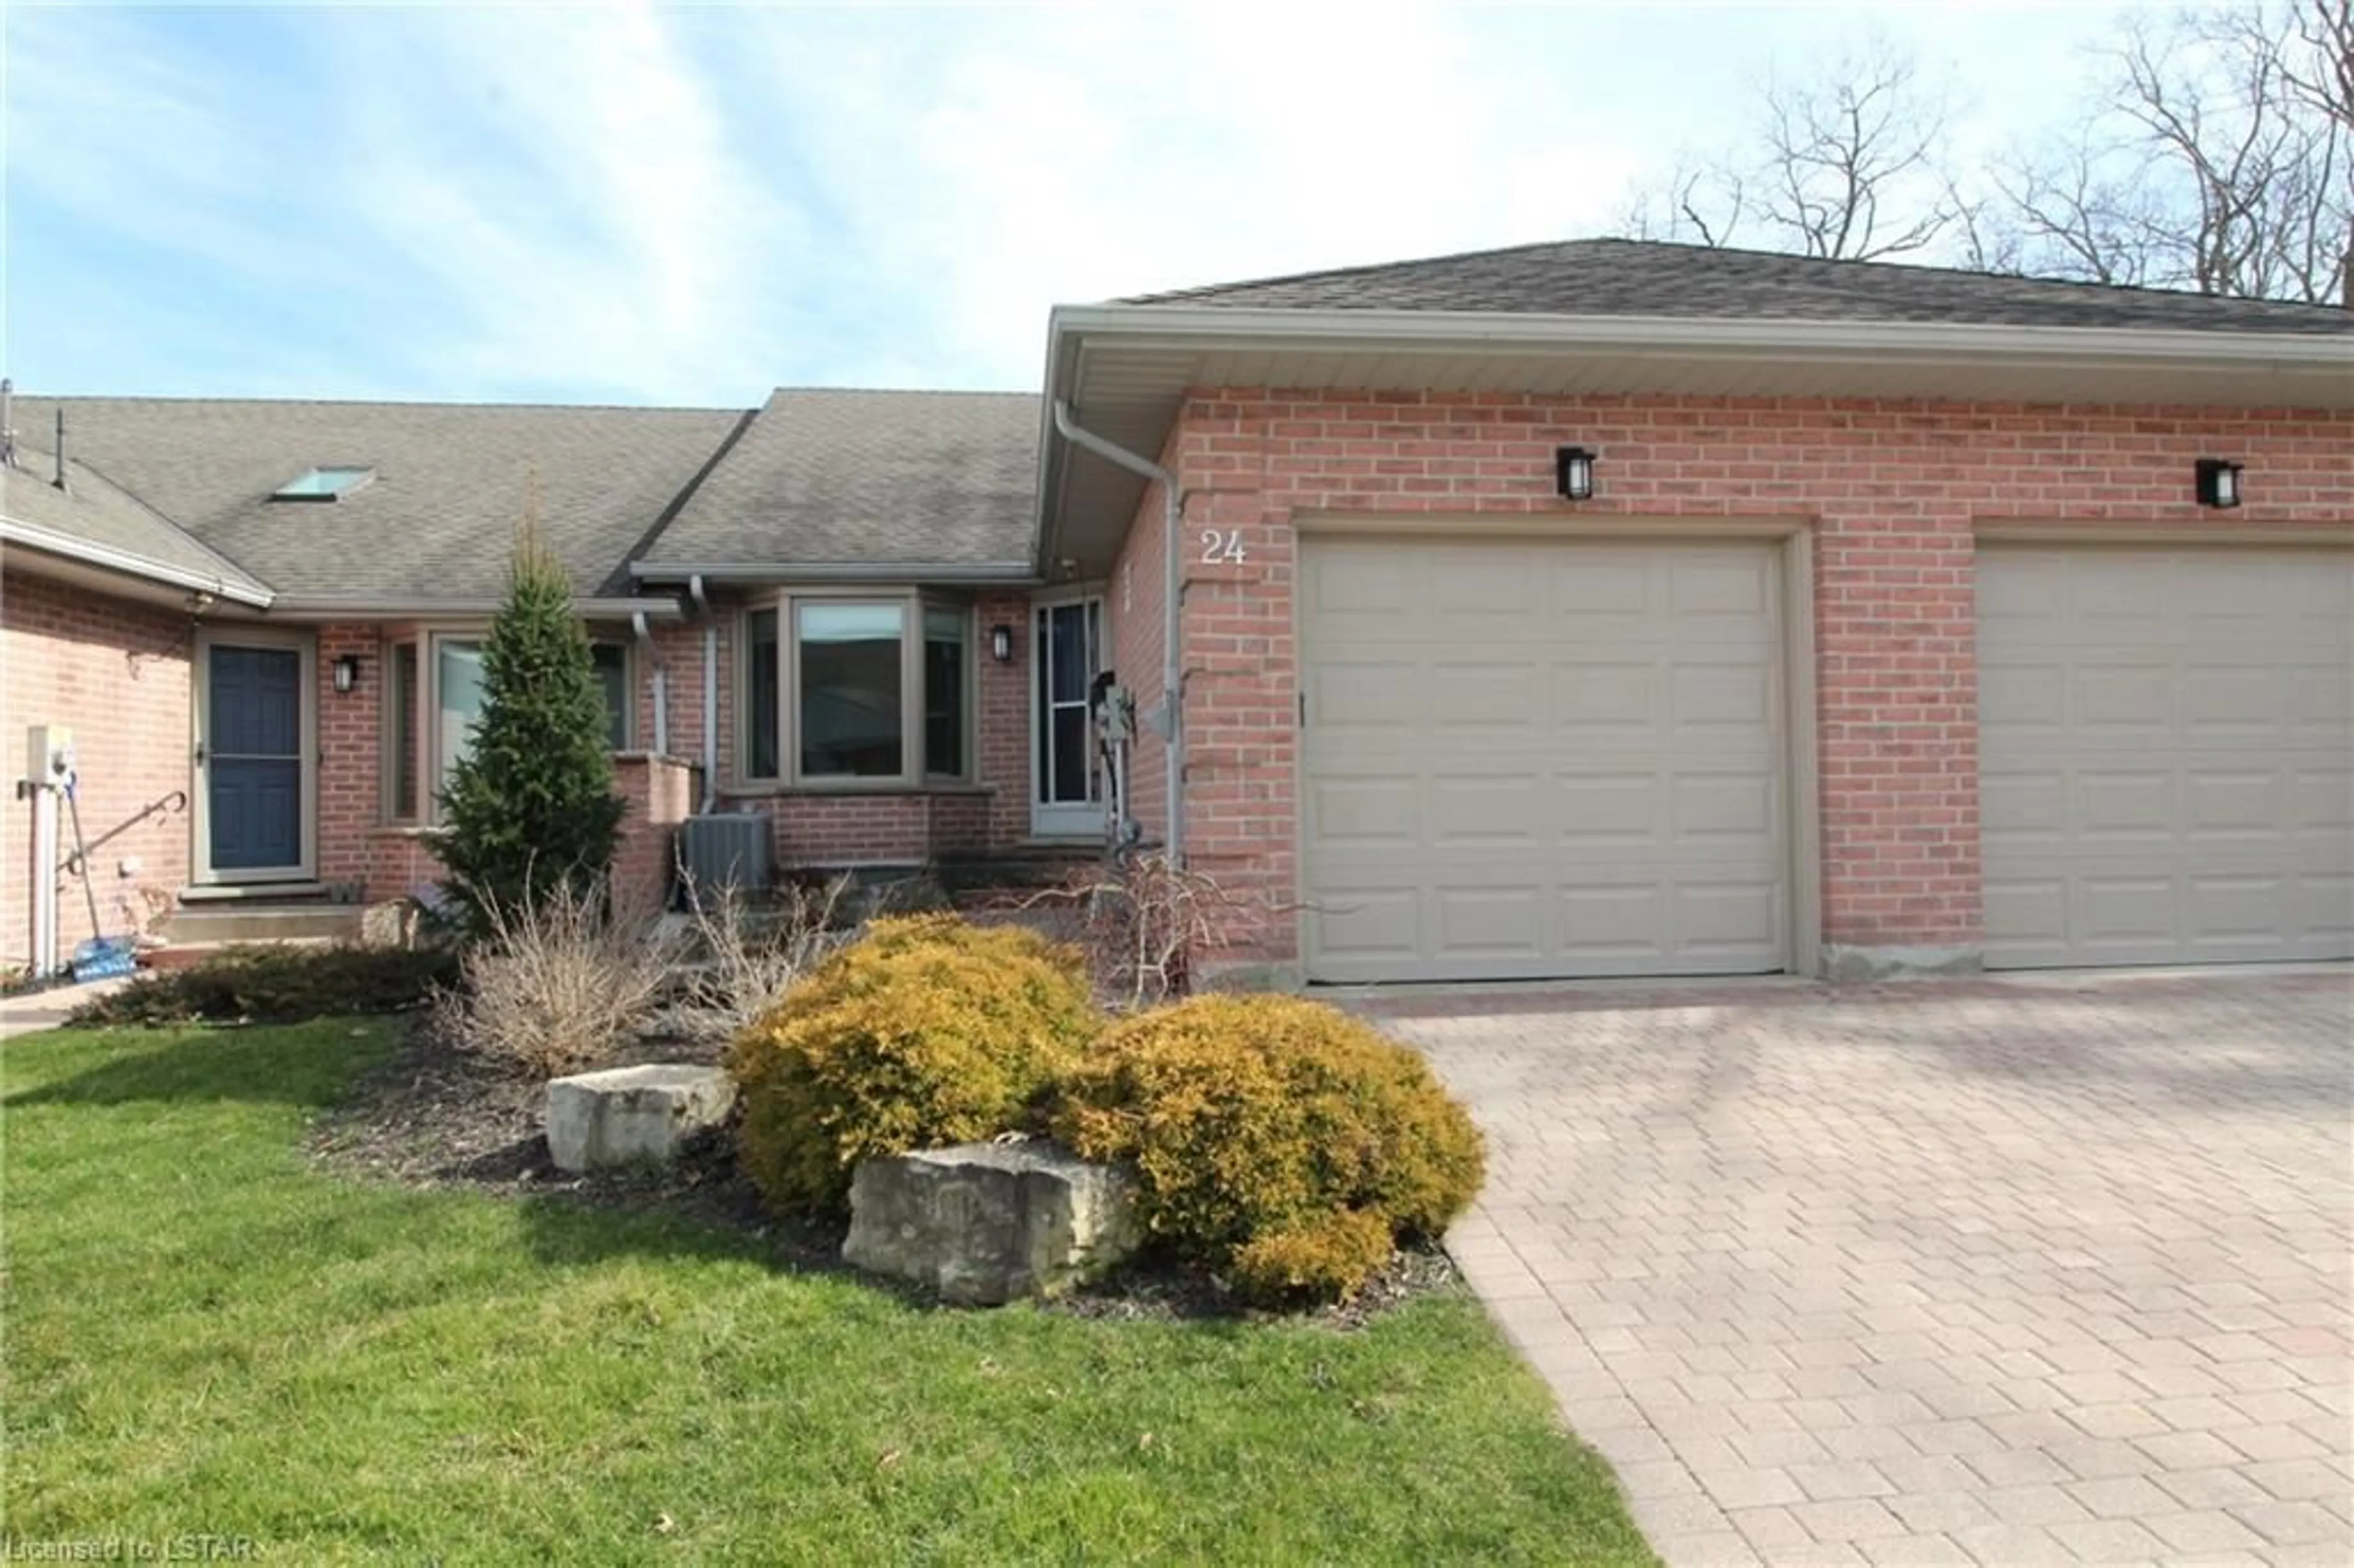 Home with brick exterior material for 90 Ontario St #24, Grand Bend Ontario N0M 1T0